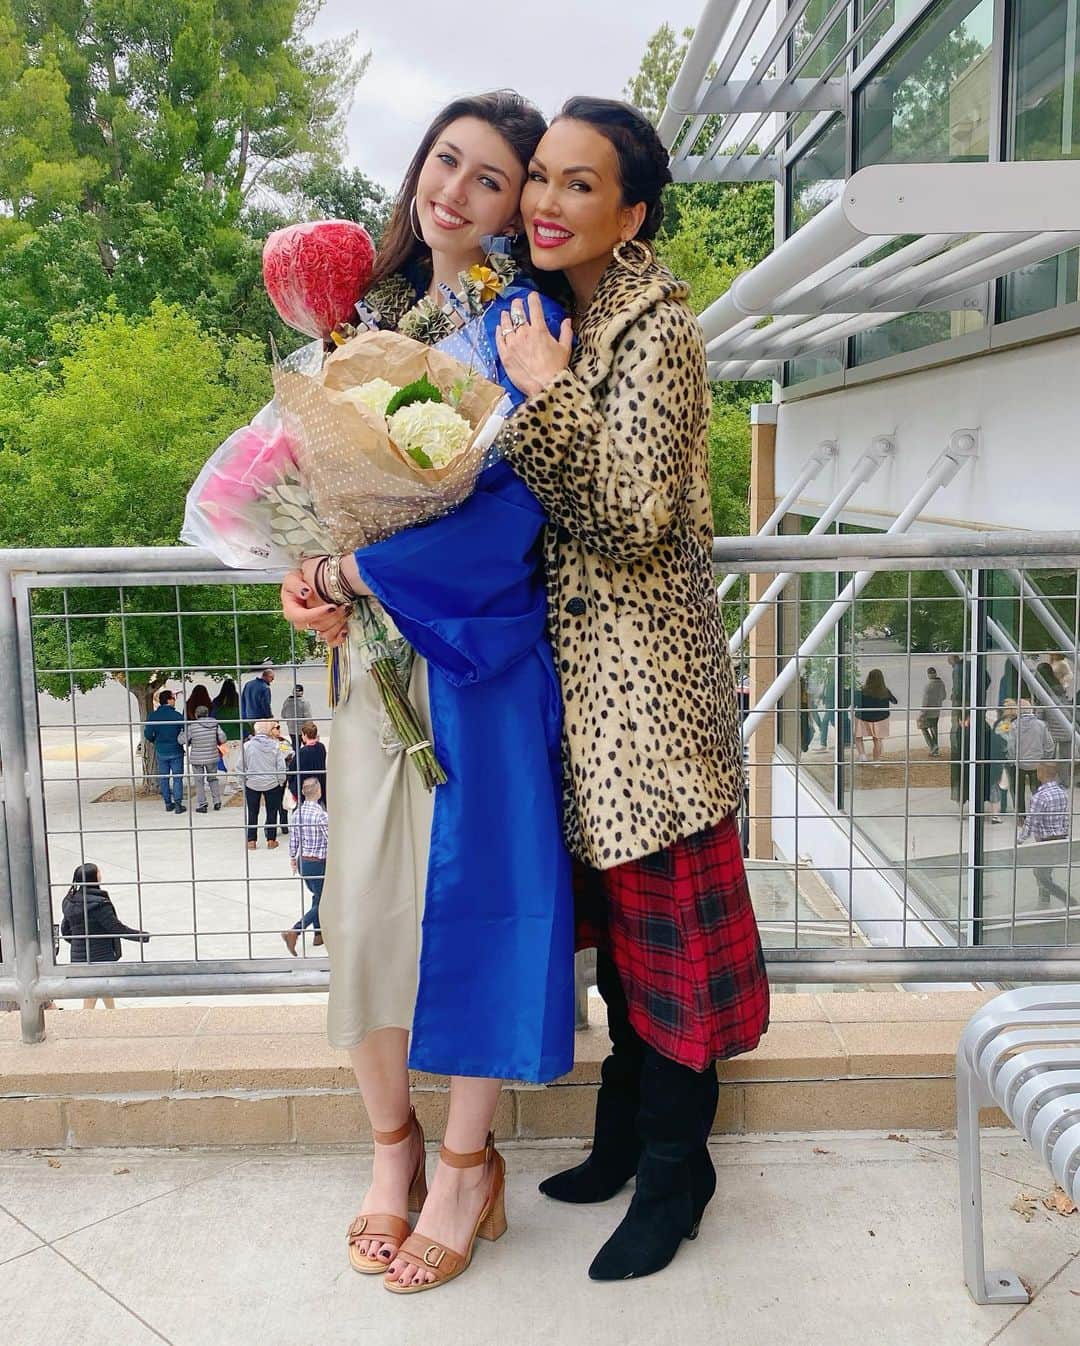 カンディー・ジョンソンのインスタグラム：「This post took me all day & several tears to make😭:  1. I can’t believe my Alani has graduated high school🥹 (i had cried off about 60% of my eye makeup & mascara this picture)  2. 2011: It feels like yesterday I was holding her as a precious, blue eyed baby. Tears filled my eyes today looking at her adorable little face, in her kindergarten graduation cap and her tiny hand, holding her little paper “diploma” scroll🥹  3 & 4:  Fast forward what feels like a few blinks of my eyes and years disappeared into senior photos and high school graduation photos😭🥹🎓  5. This was my first cry of the day: watching my beautiful, young woman, gracefully walk with confidence in her cap & gown…as if time sped up and my heart still wanted to rewind time and hold onto her being little, a little while longer❤️  6. We all tried to be the family that cheered, hollered, whistled and yelled the loudest…especially since I didn’t end up ordering the cowbells I thought would be fun and the family next to us with the air horn did make me wish I bought some.  7. Afterwards when I hugged her…my heart just sprang a love-leak I couldn’t stop crying and holding onto my baby girl who graduated❤️  8. Alani with all her siblings & cousins ❤️ who all cheered the loudest!  9. With her Nonni & Nana - in a complete “grandma sandwich” of love ❤️   10. Alani & her sweet boyfriend, Jadyn - who wins for best “vintage tuxedo t-shirt” award also!   To my Alani…(oh no, I’m crying again😭🥹😂)… My first baby girl, you’re my heaven-made-best-friend (I know people say you can’t be friends with your kids but I think you can be their parent and they can be your best friend too❤️) since before I even saw your face.  You are filled with so much creativity, from writing that’s brought me to tears and in awe of your talent, to your works of art that have amazed me. Everything you touch and do, is turned into art. Even though you love punk music and playing the bass, your tender, kind and caring heart will always be the music that your heart plays for the world.  You will do great and creative things my beautiful girl❤️And I’ll always cheer you on! I love you forever & always, your biggest fan for life, Mama❤️」